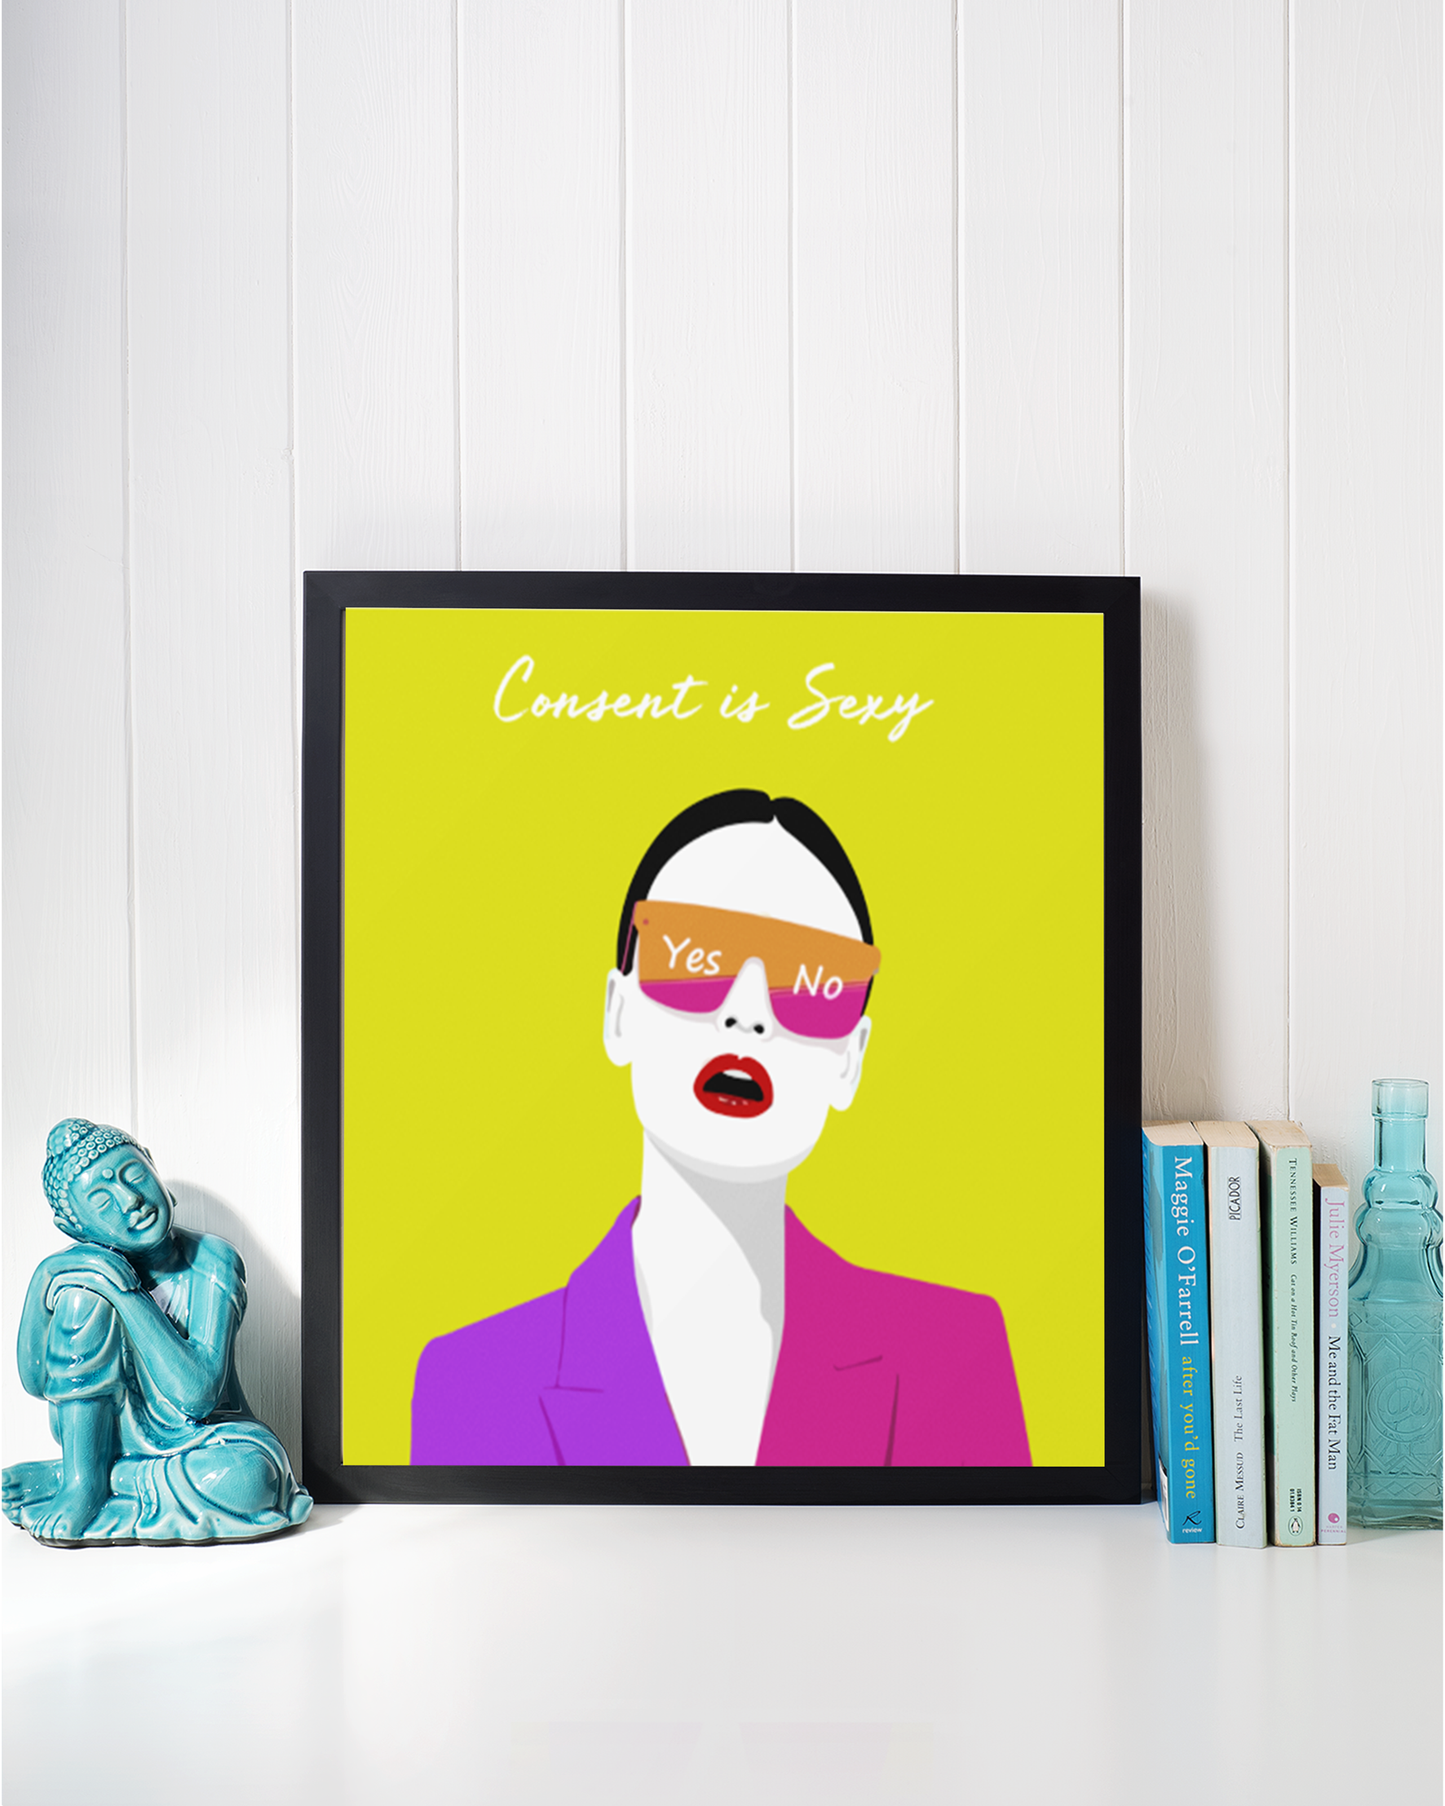 Consent is sexy framed posters - Muselot